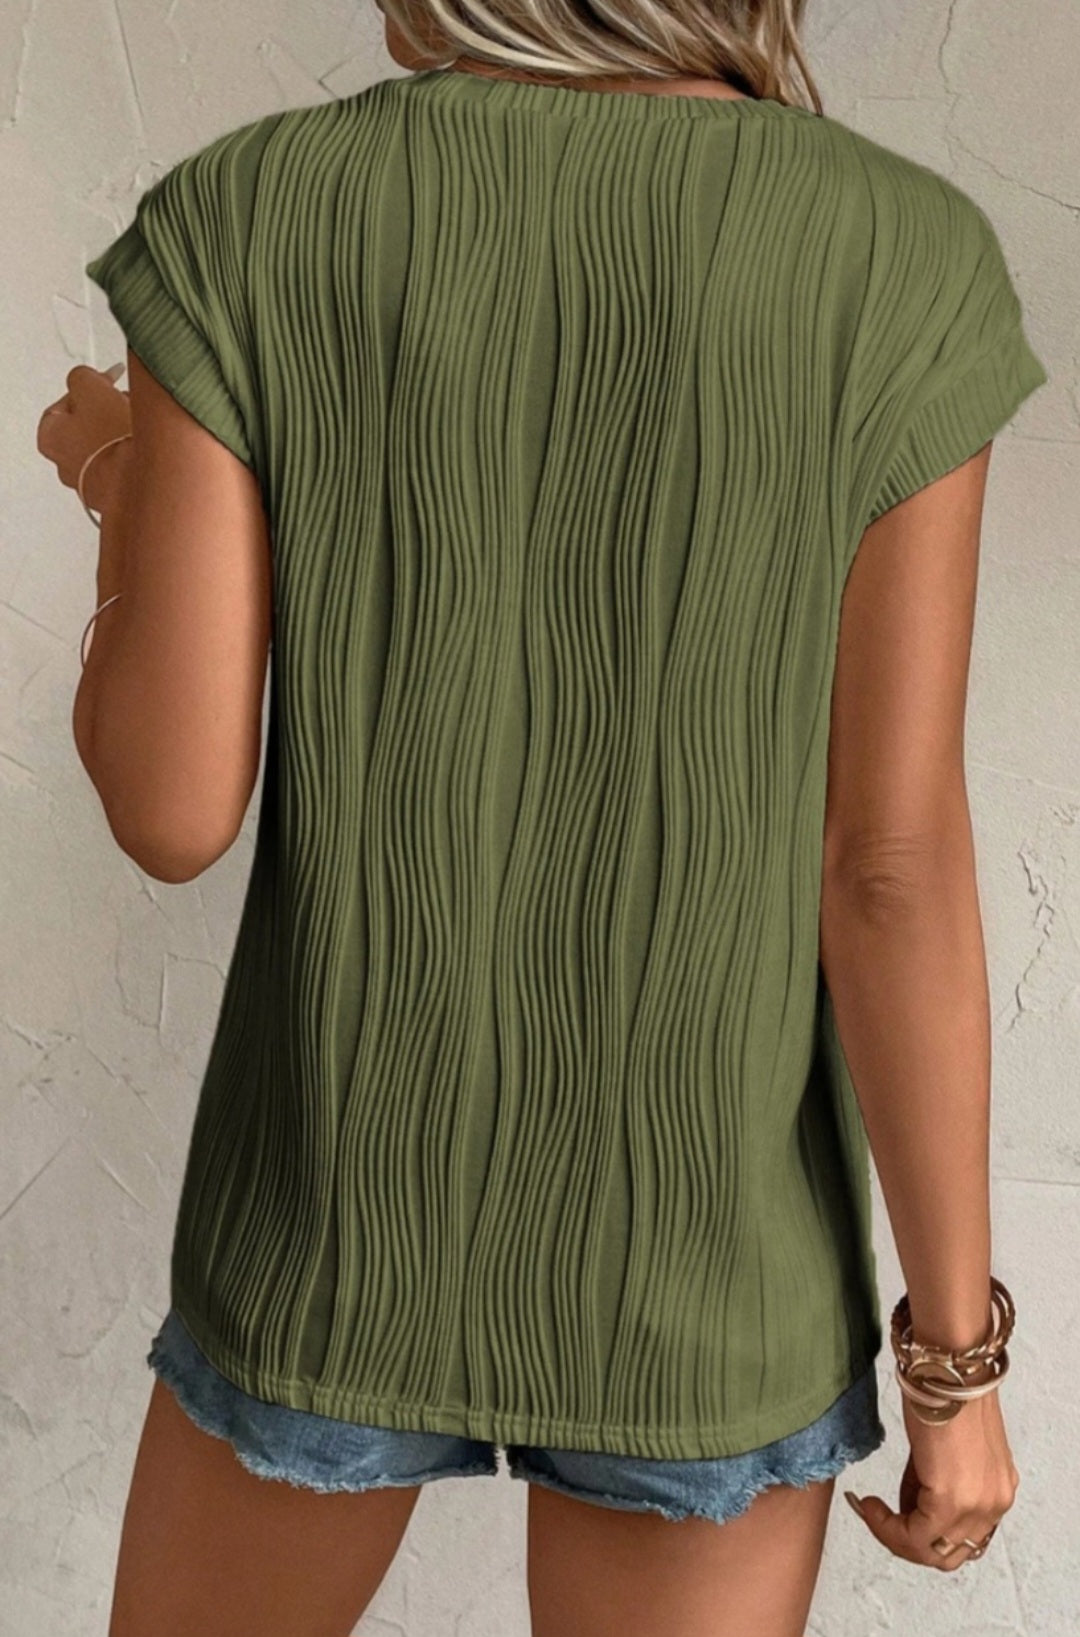 Tony Olive textured top small to 2xl